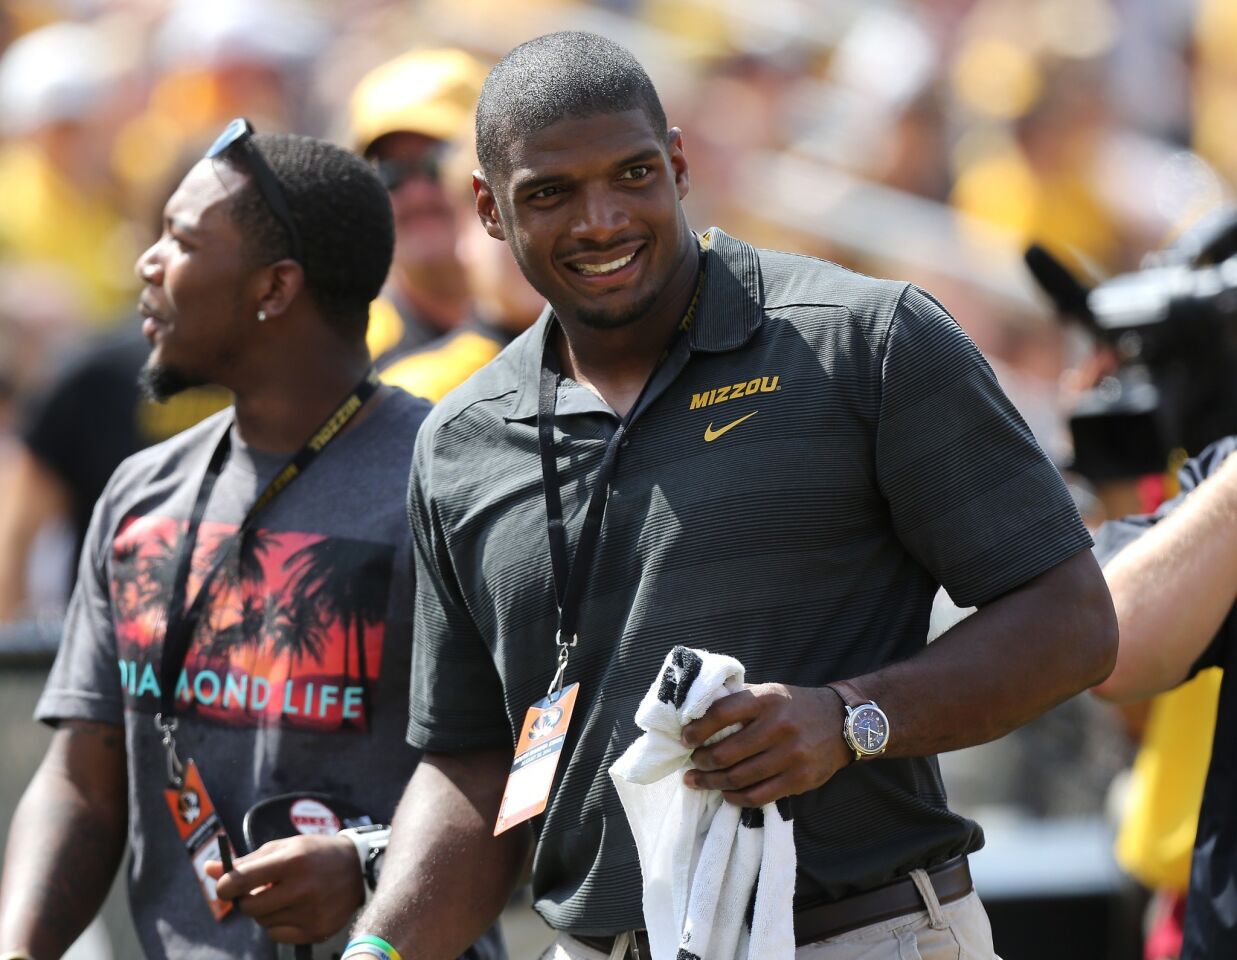 Michael Sam smiles while standing on the sideline of a game between Missouri, where he played in college, and South Dakota State on Saturday.